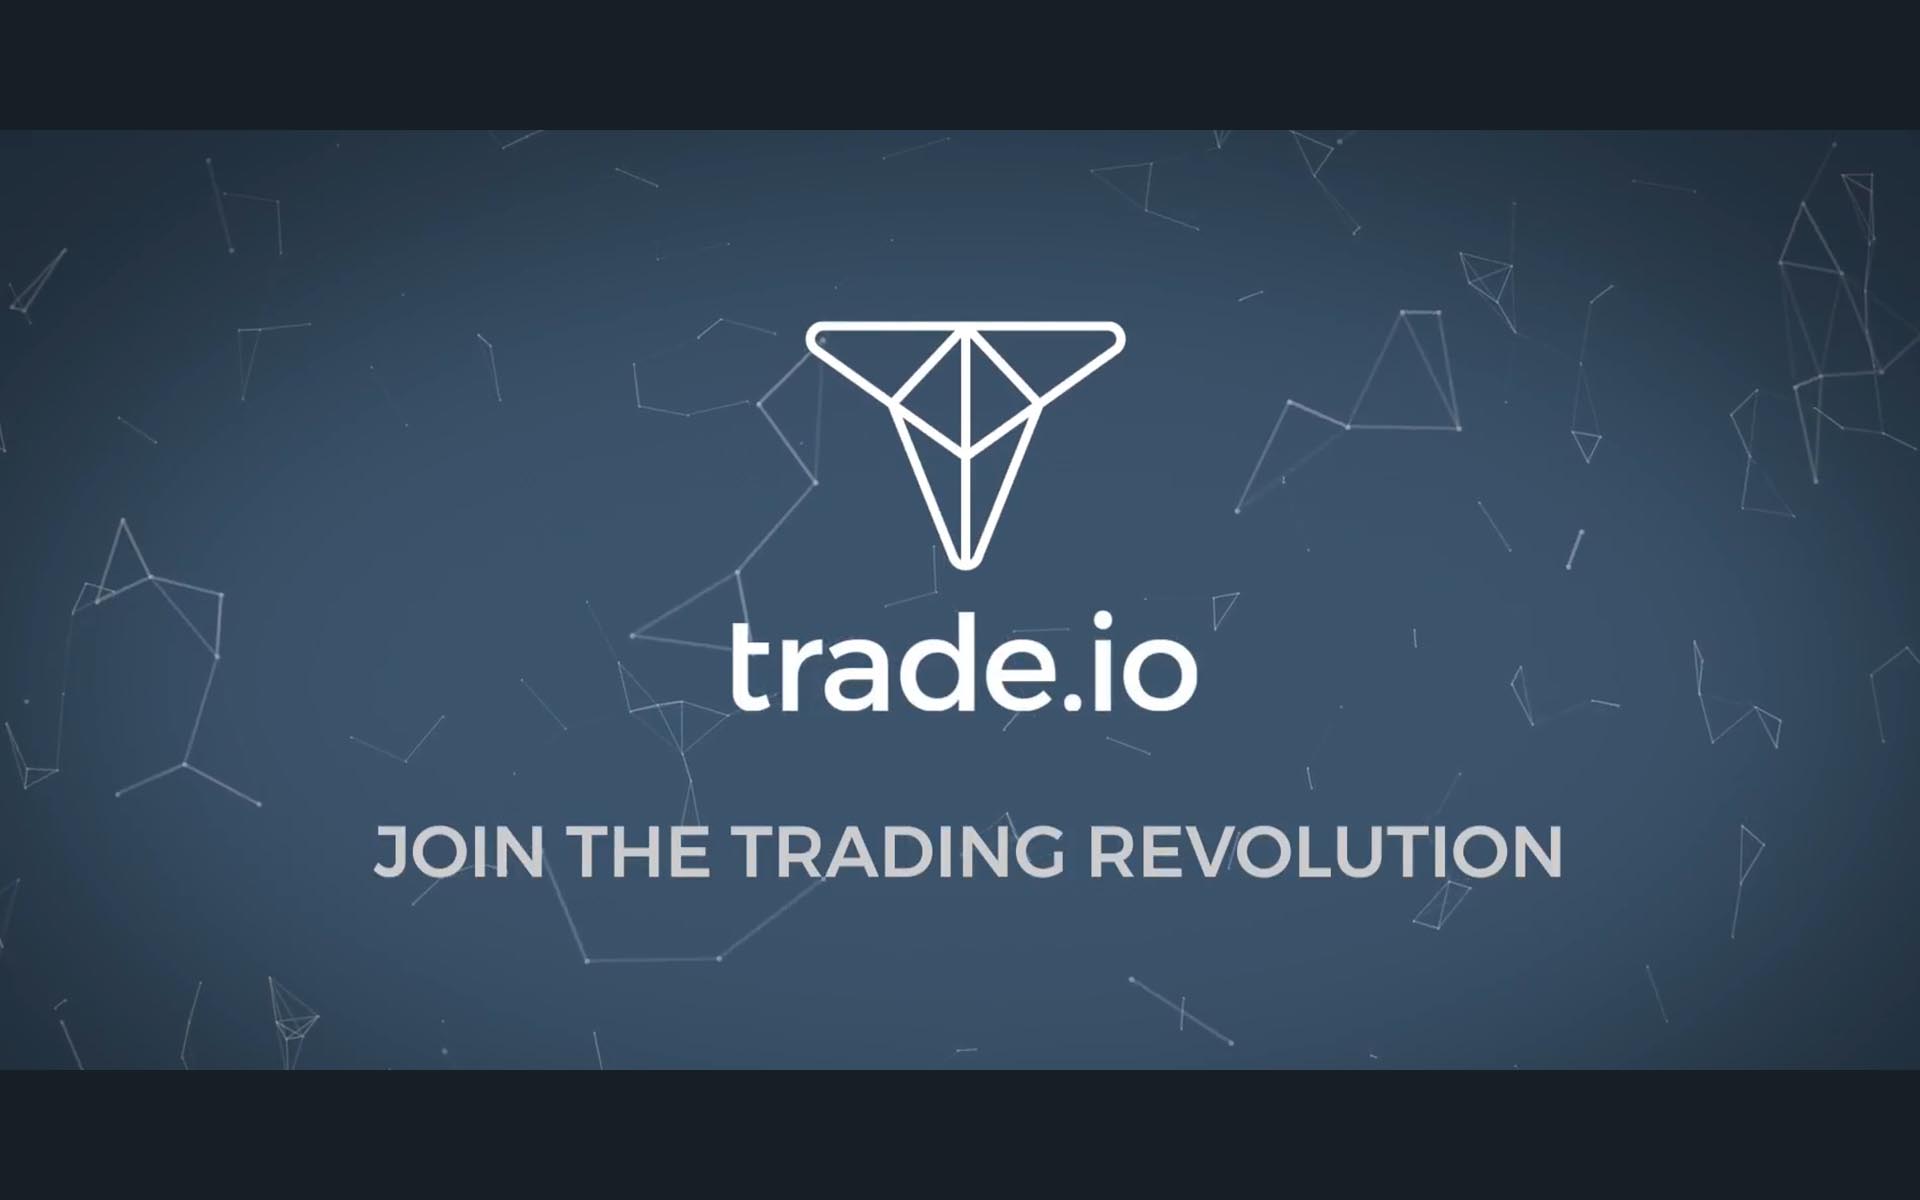 Trade.io Adjusts Market Cap & Trade Token Price Based On The Rise in Ethereum And Demand for Lower Entry Point